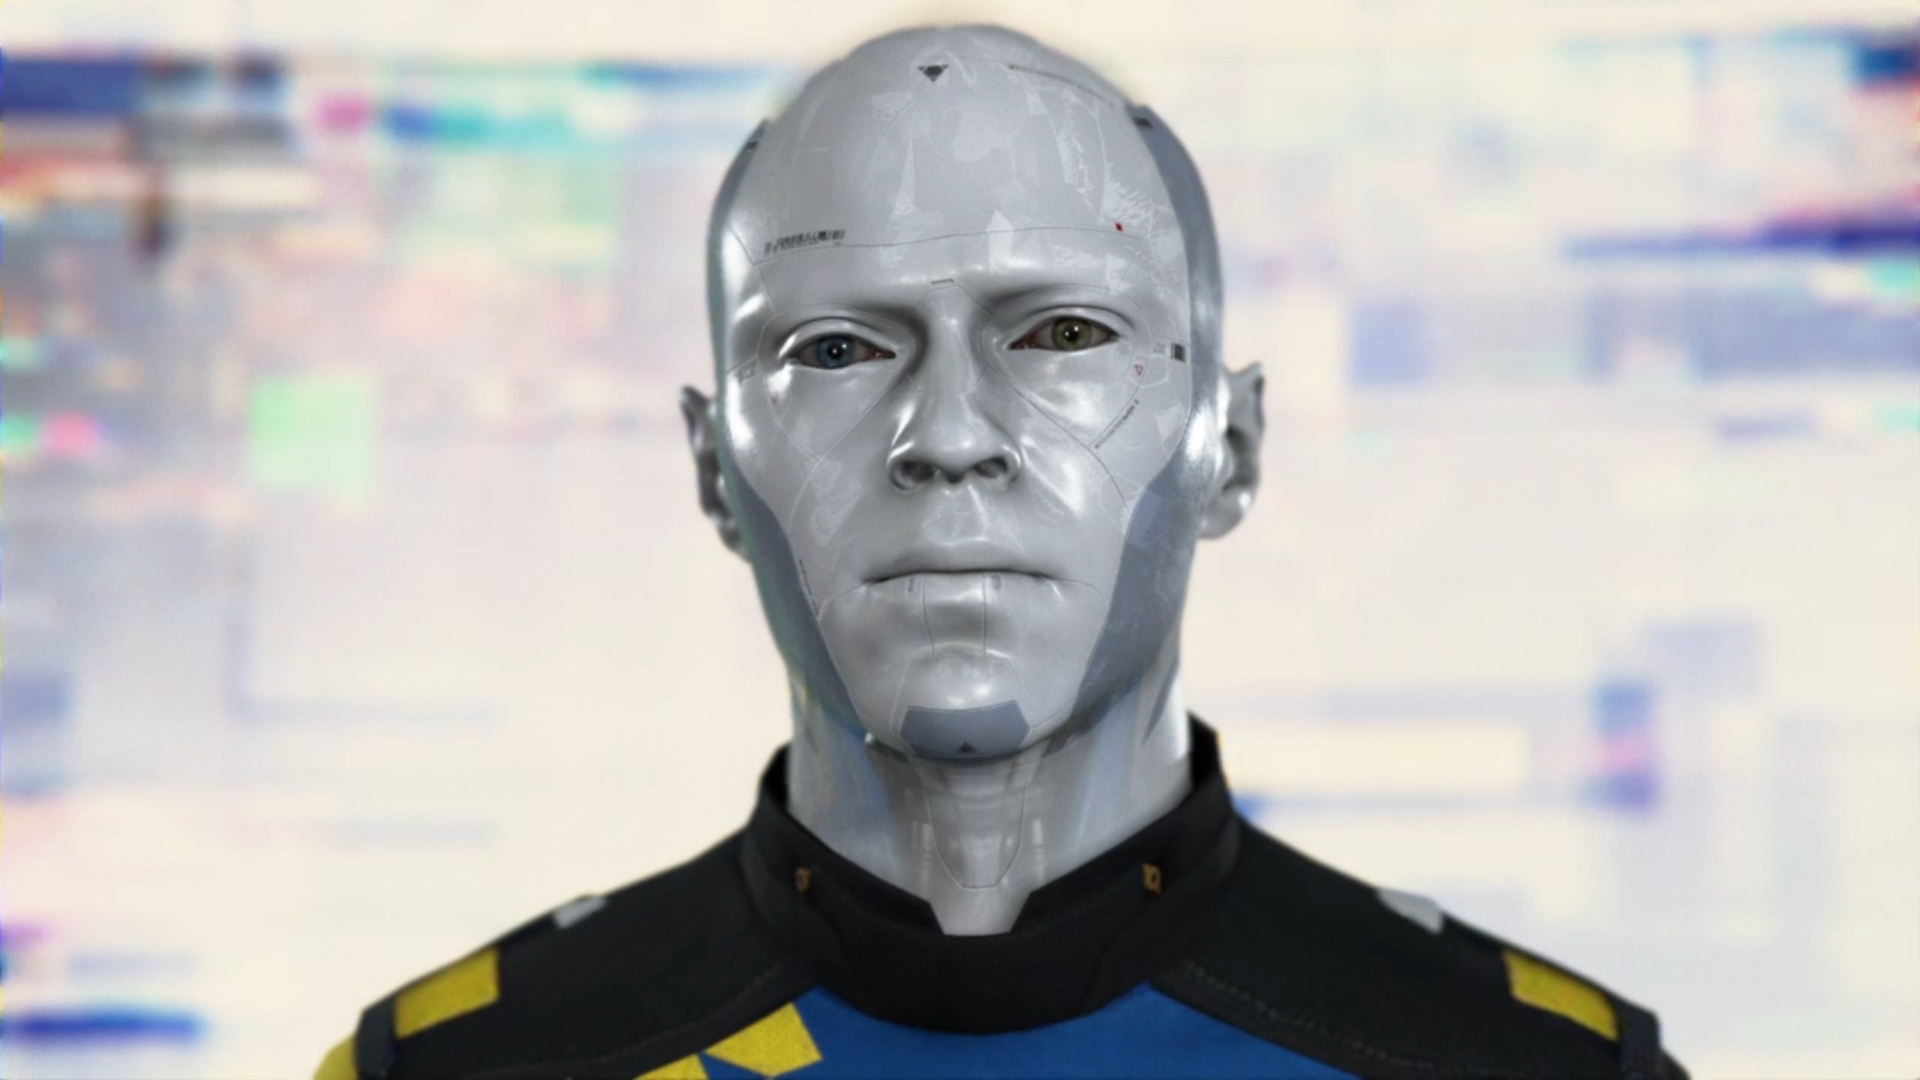 Detroit: Become Human Picture